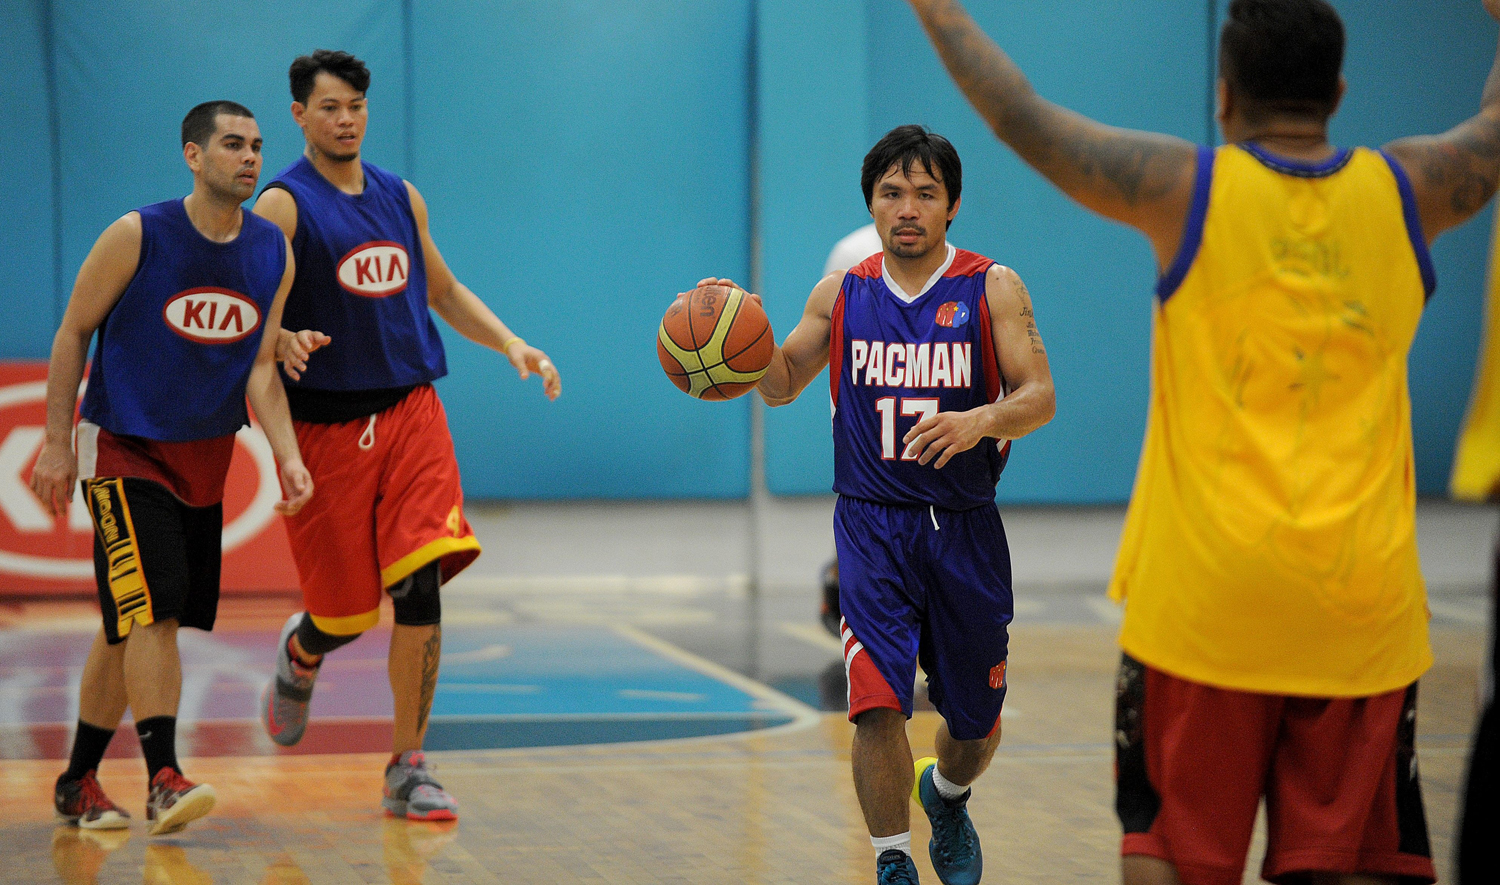 Manny Pacquiao dribbles during a practice session with the Kia Motors team in Manila on August 15, 2014. (Jay Directo — AFP/Getty Images)